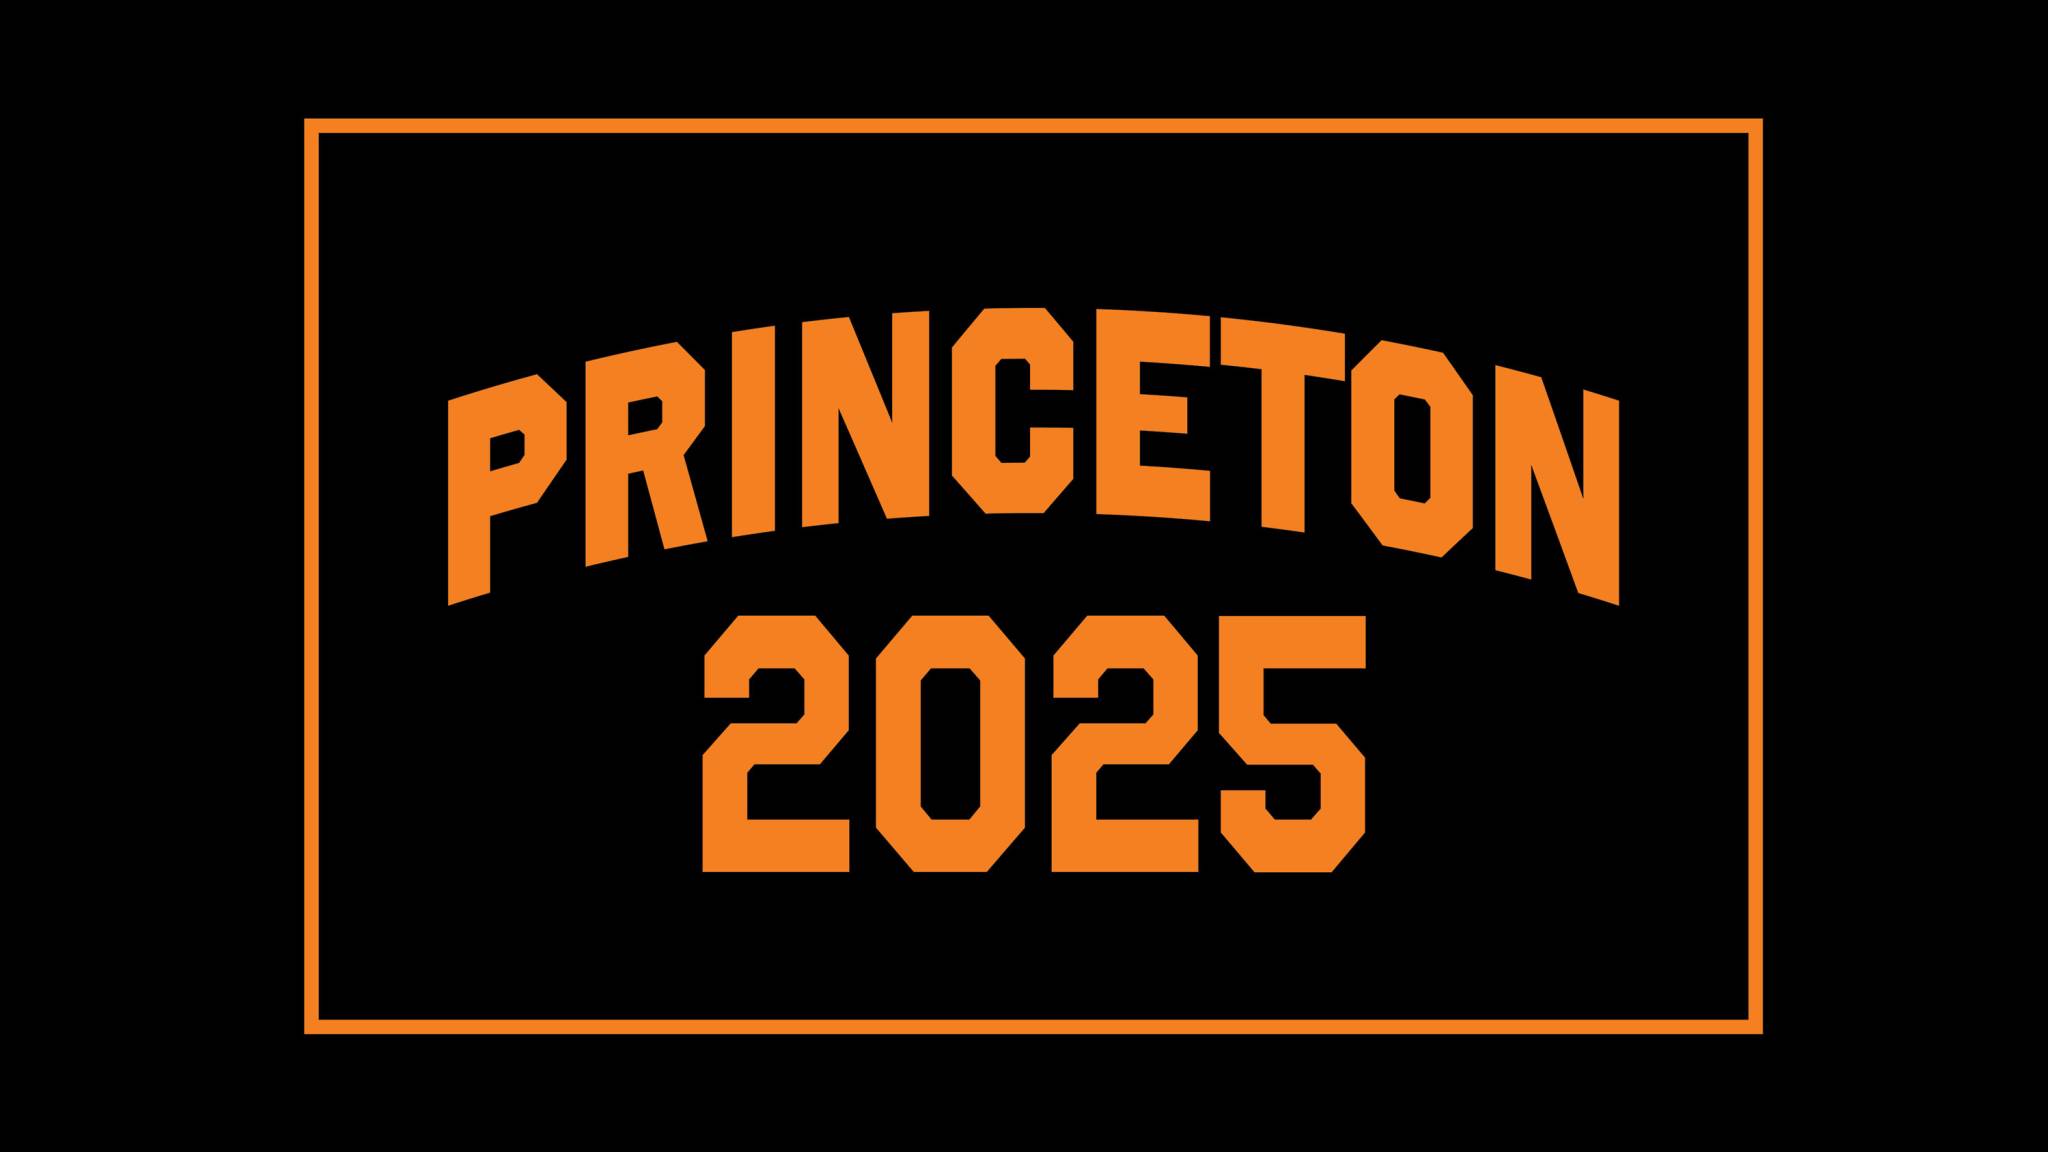 In an extraordinary year, Princeton offers admission to 1,498 students